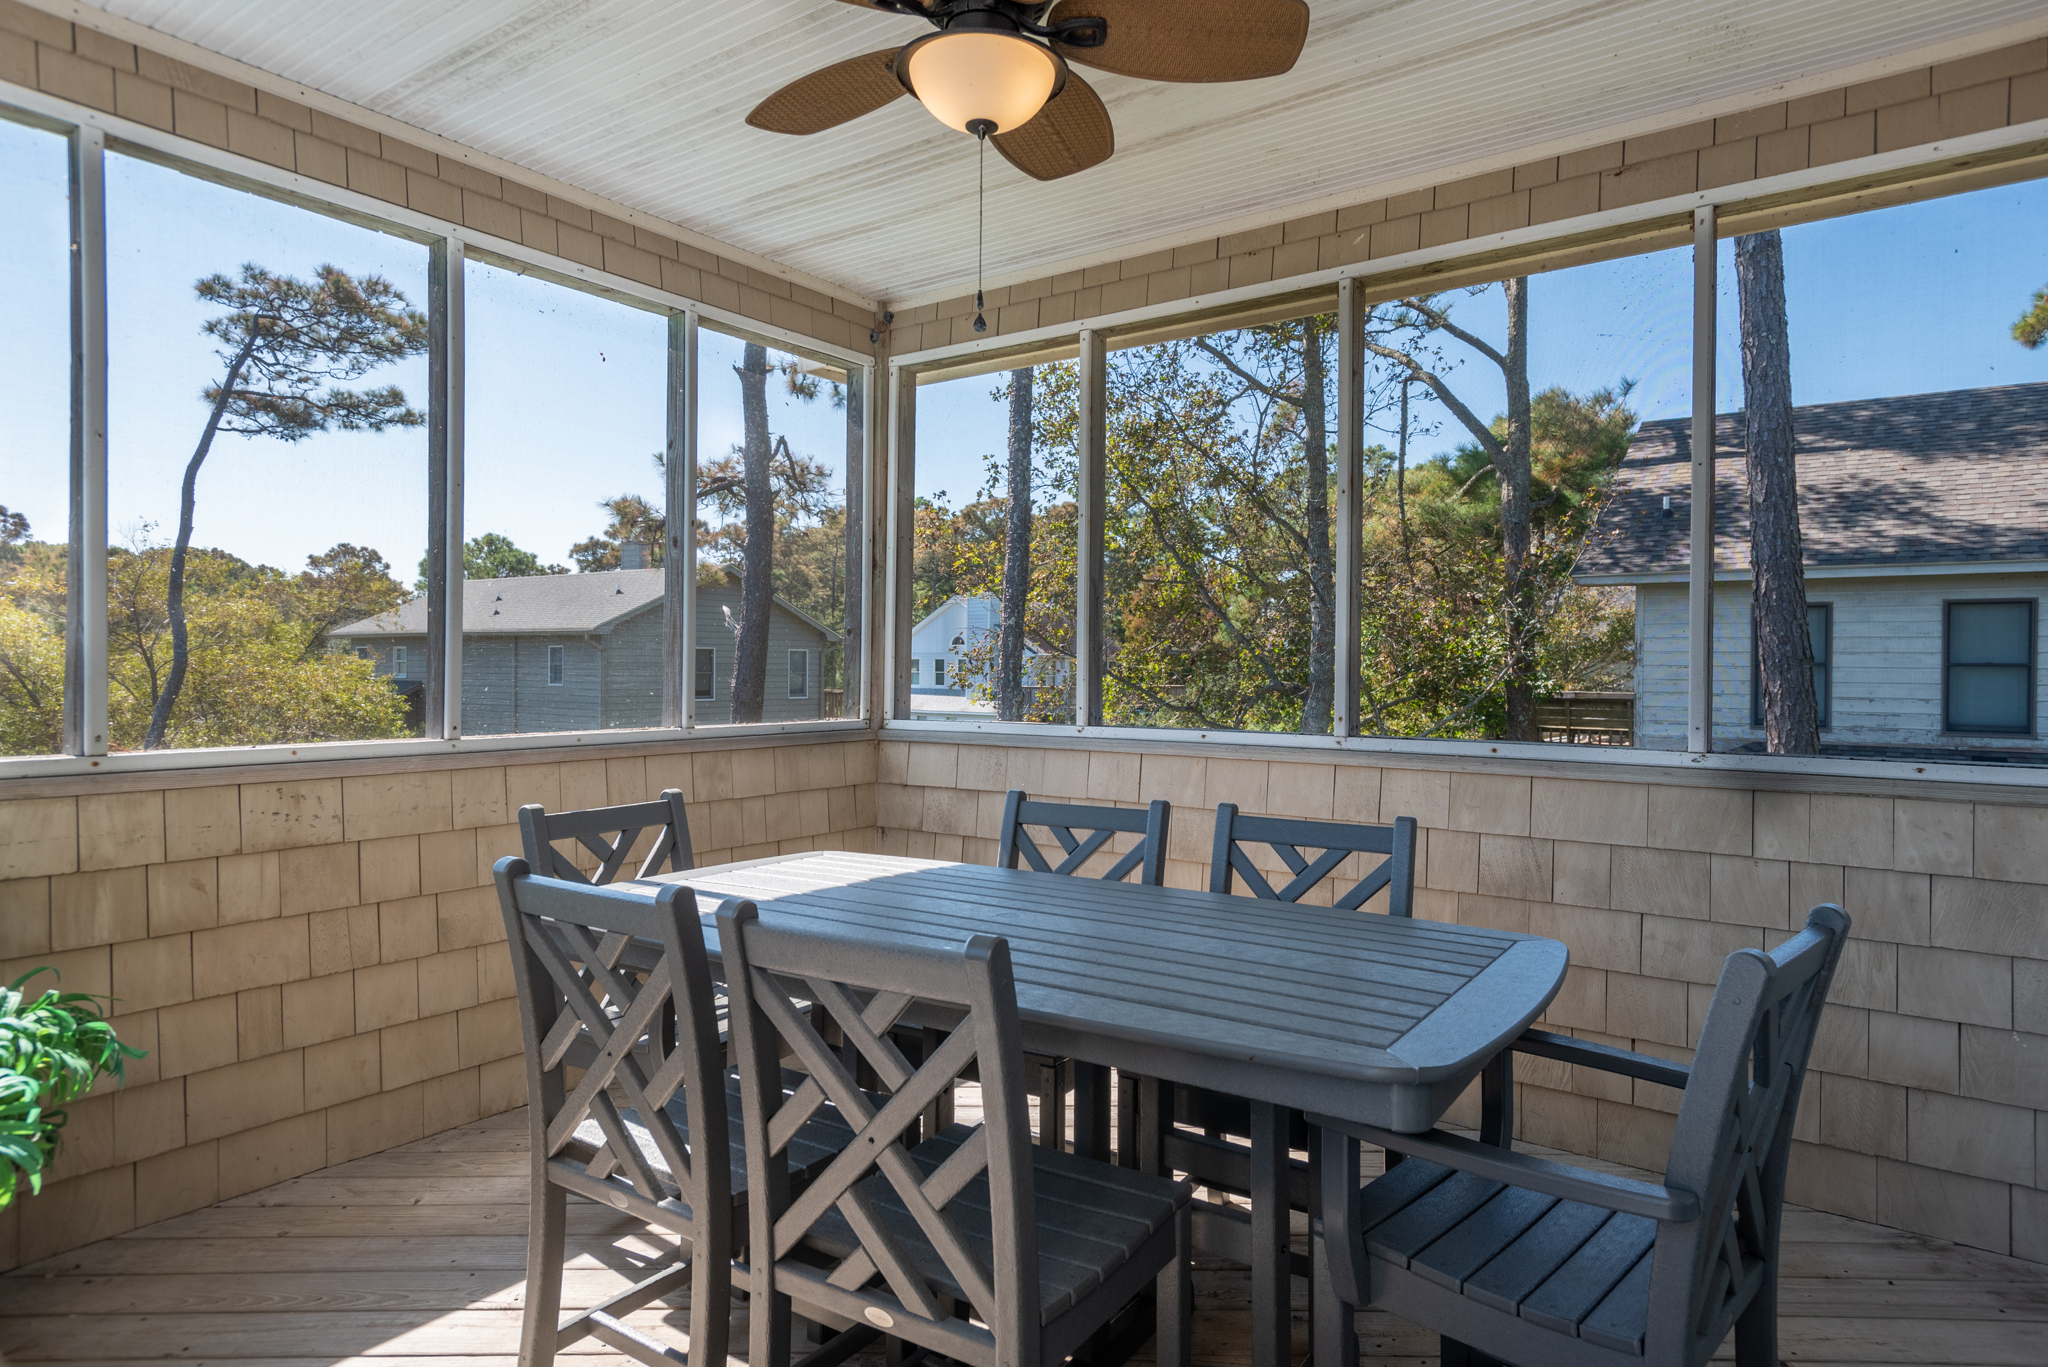 CL535: Good Sun-Stations | Top Level Screened Porch